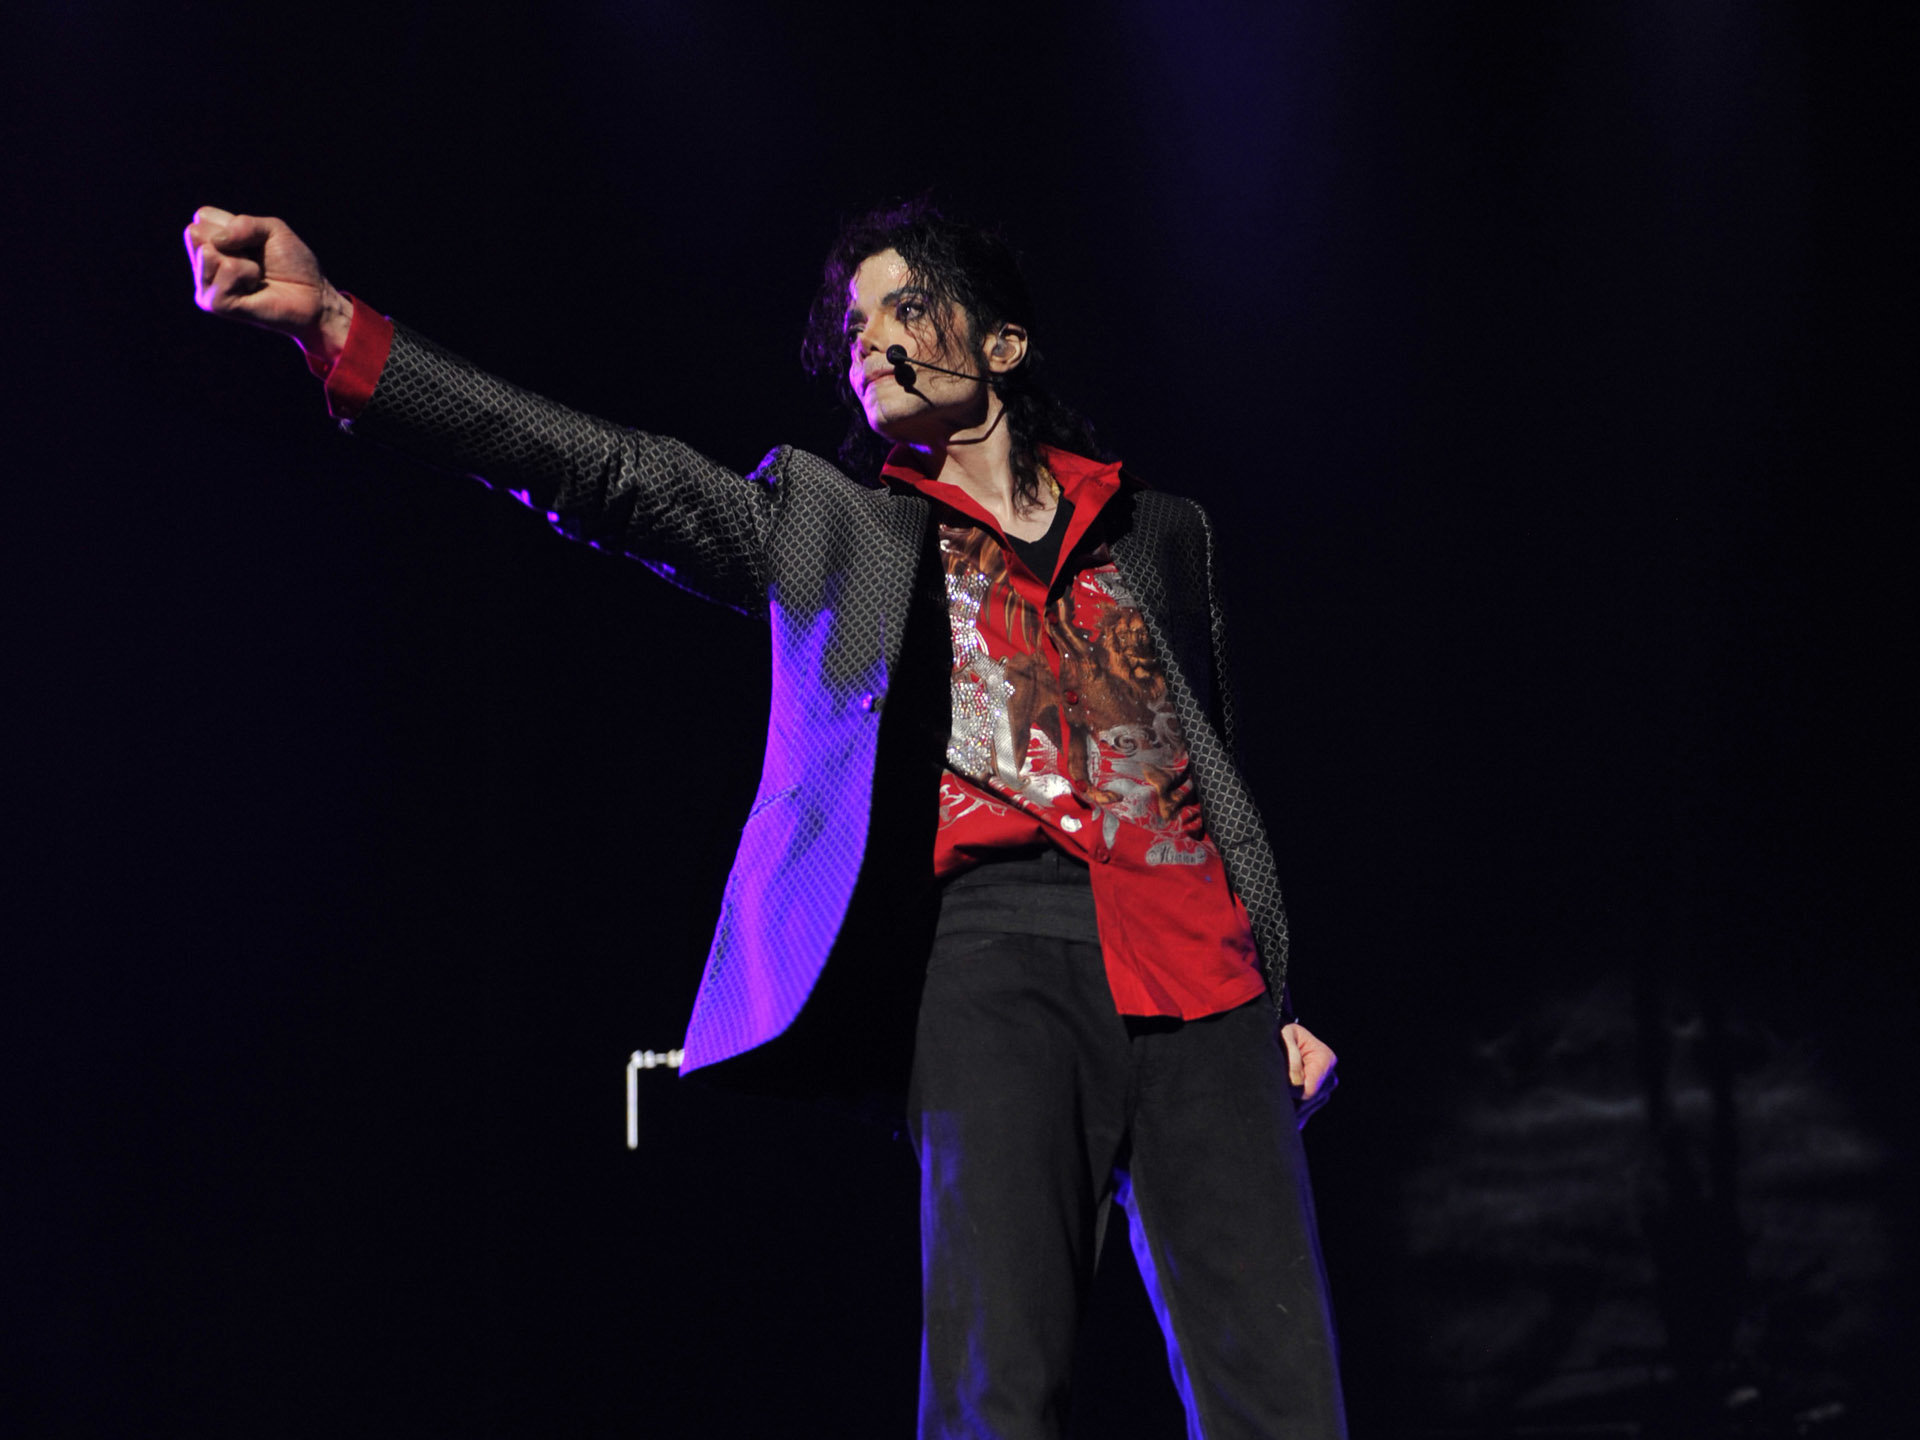 9 Artists Who Are Influenced By The 'King Of Pop' Michael Jackson